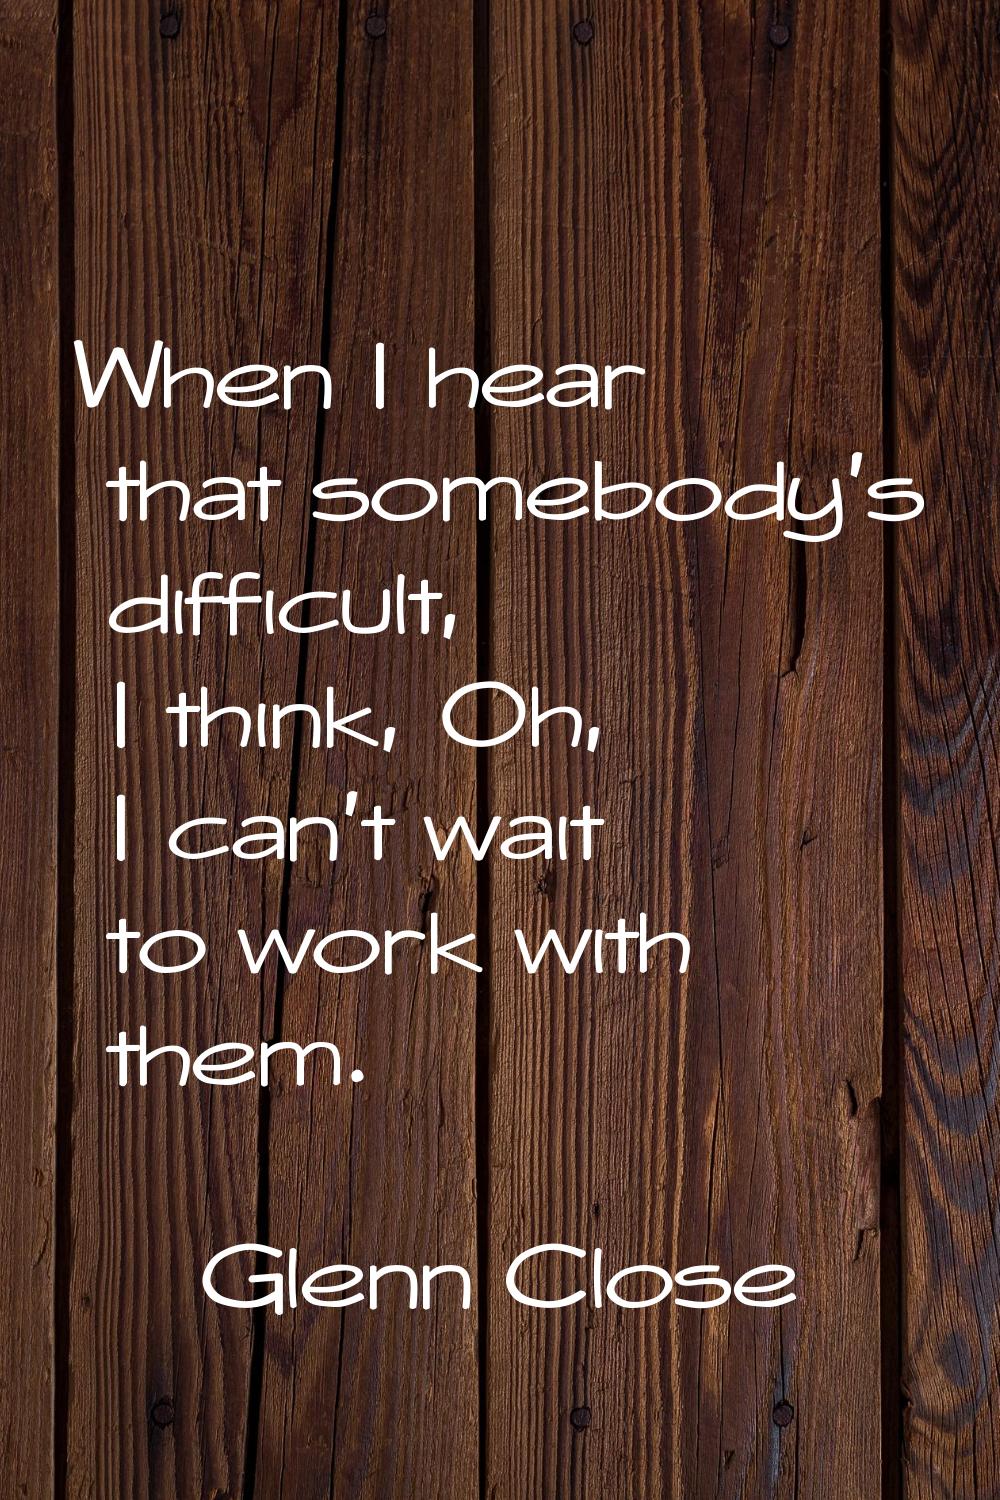 When I hear that somebody's difficult, I think, Oh, I can't wait to work with them.